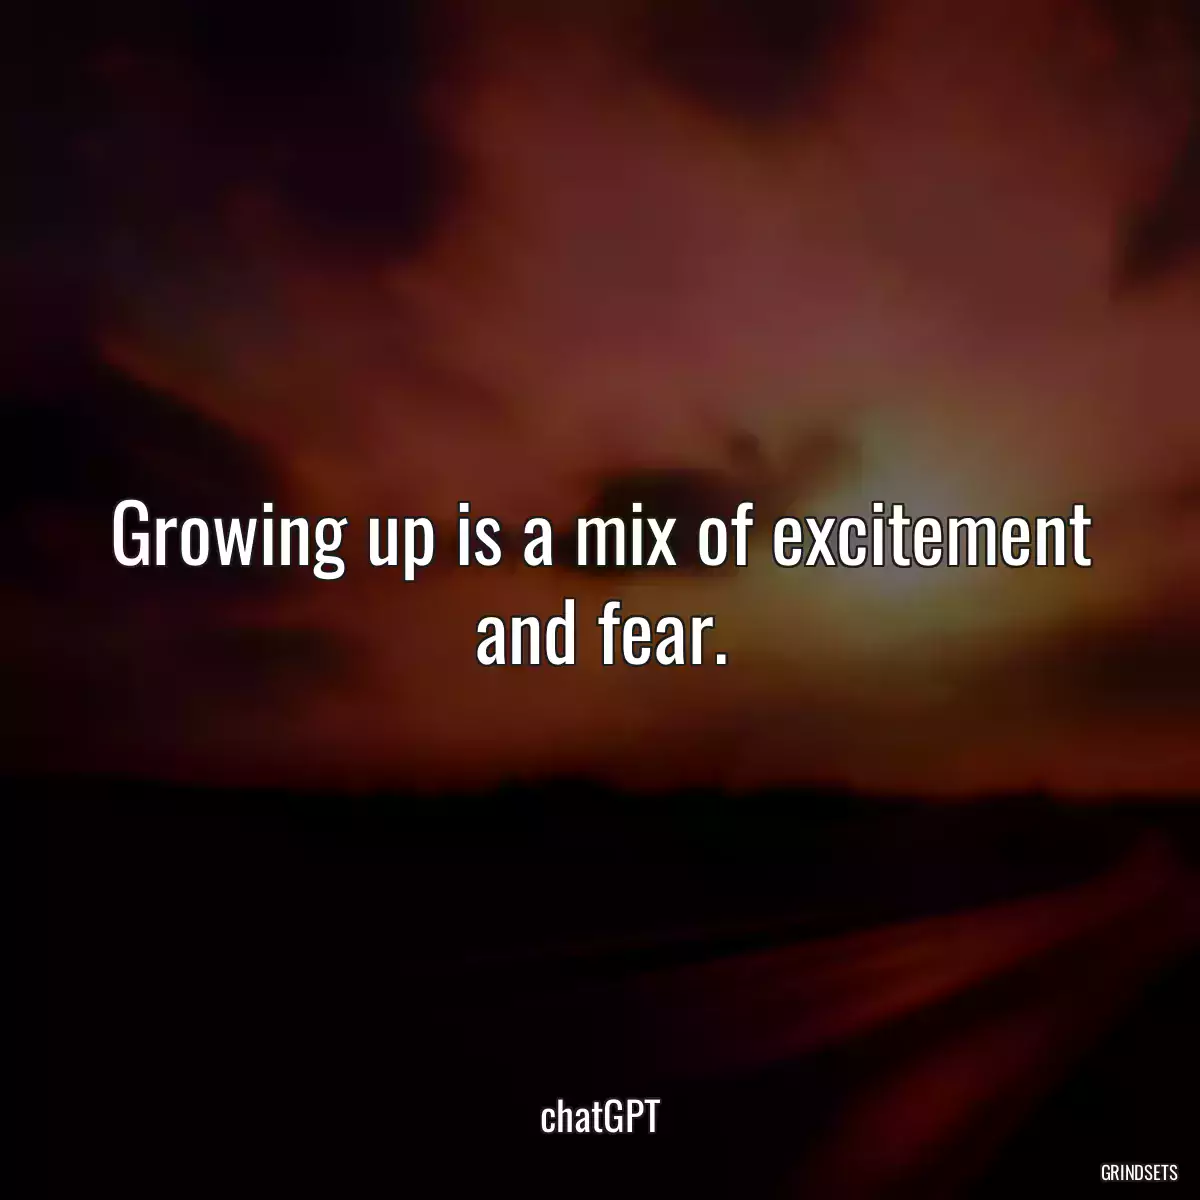 Growing up is a mix of excitement and fear.